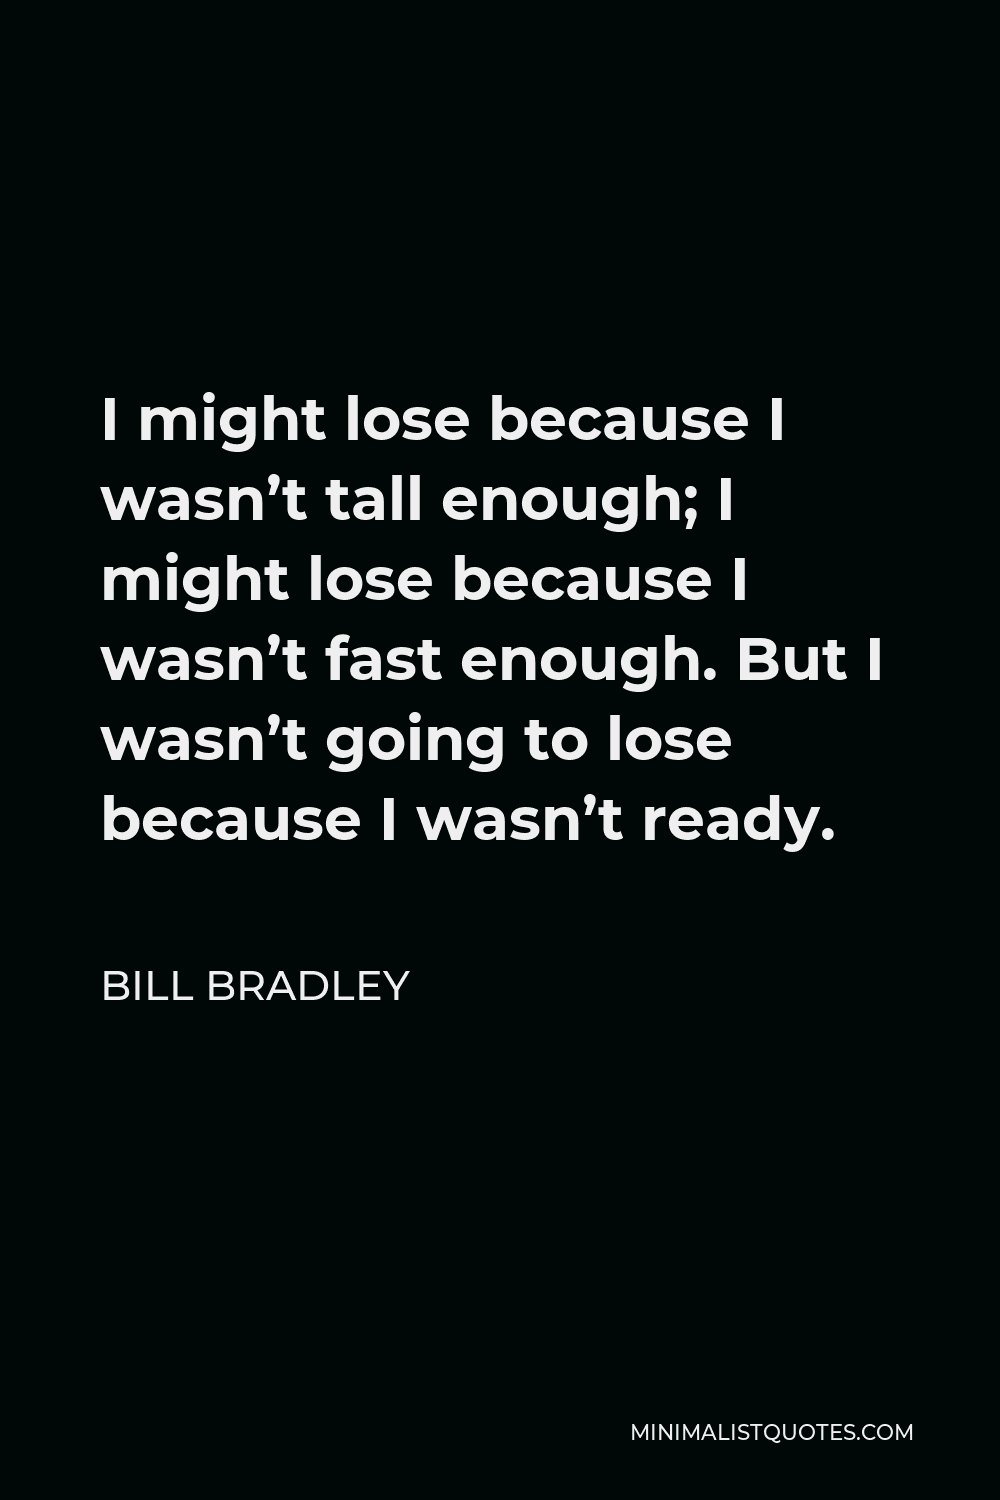 Bill Bradley Quote - I might lose because I wasn’t tall enough; I might lose because I wasn’t fast enough. But I wasn’t going to lose because I wasn’t ready.